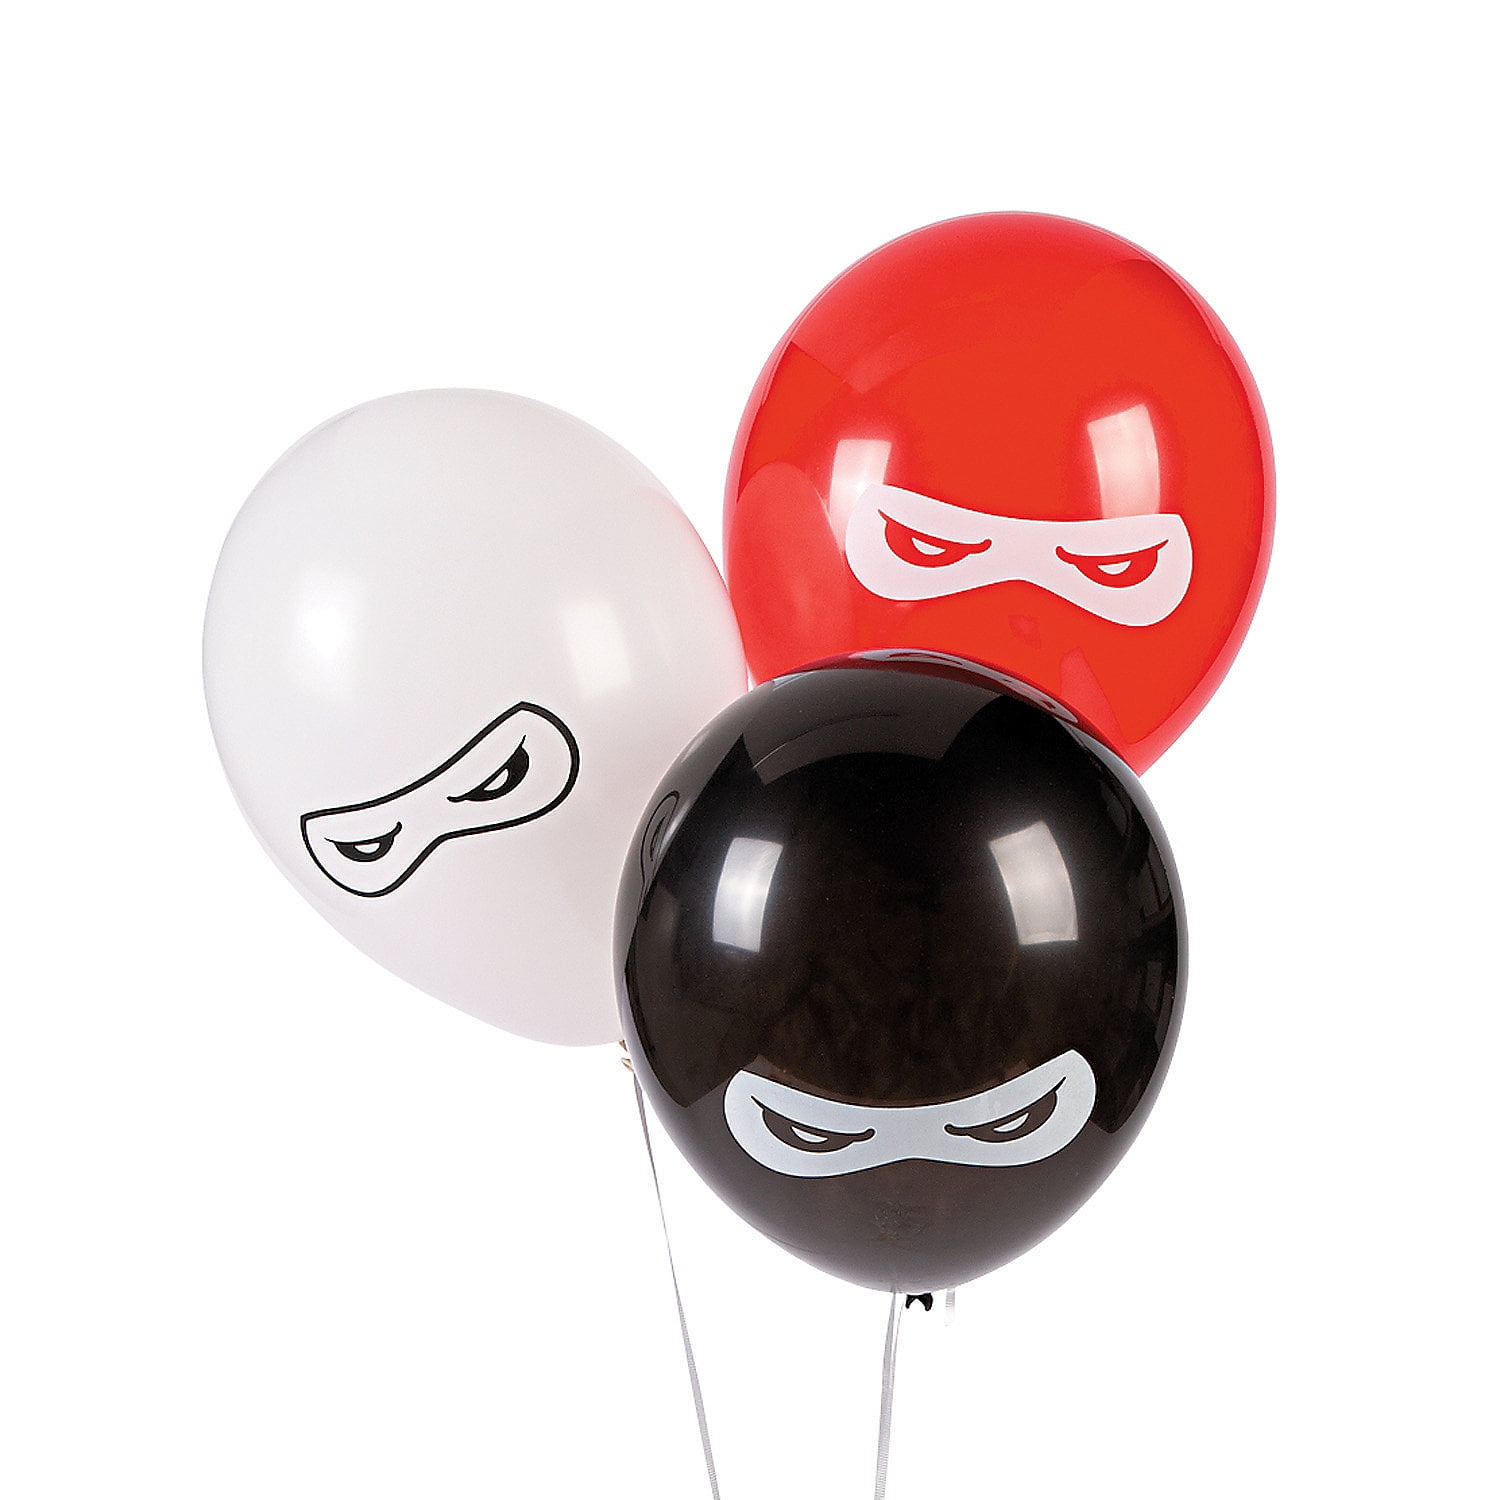 12" Printed Red & Black Assorted Latex Balloons Pack of 6 by Party Decor Ninja 